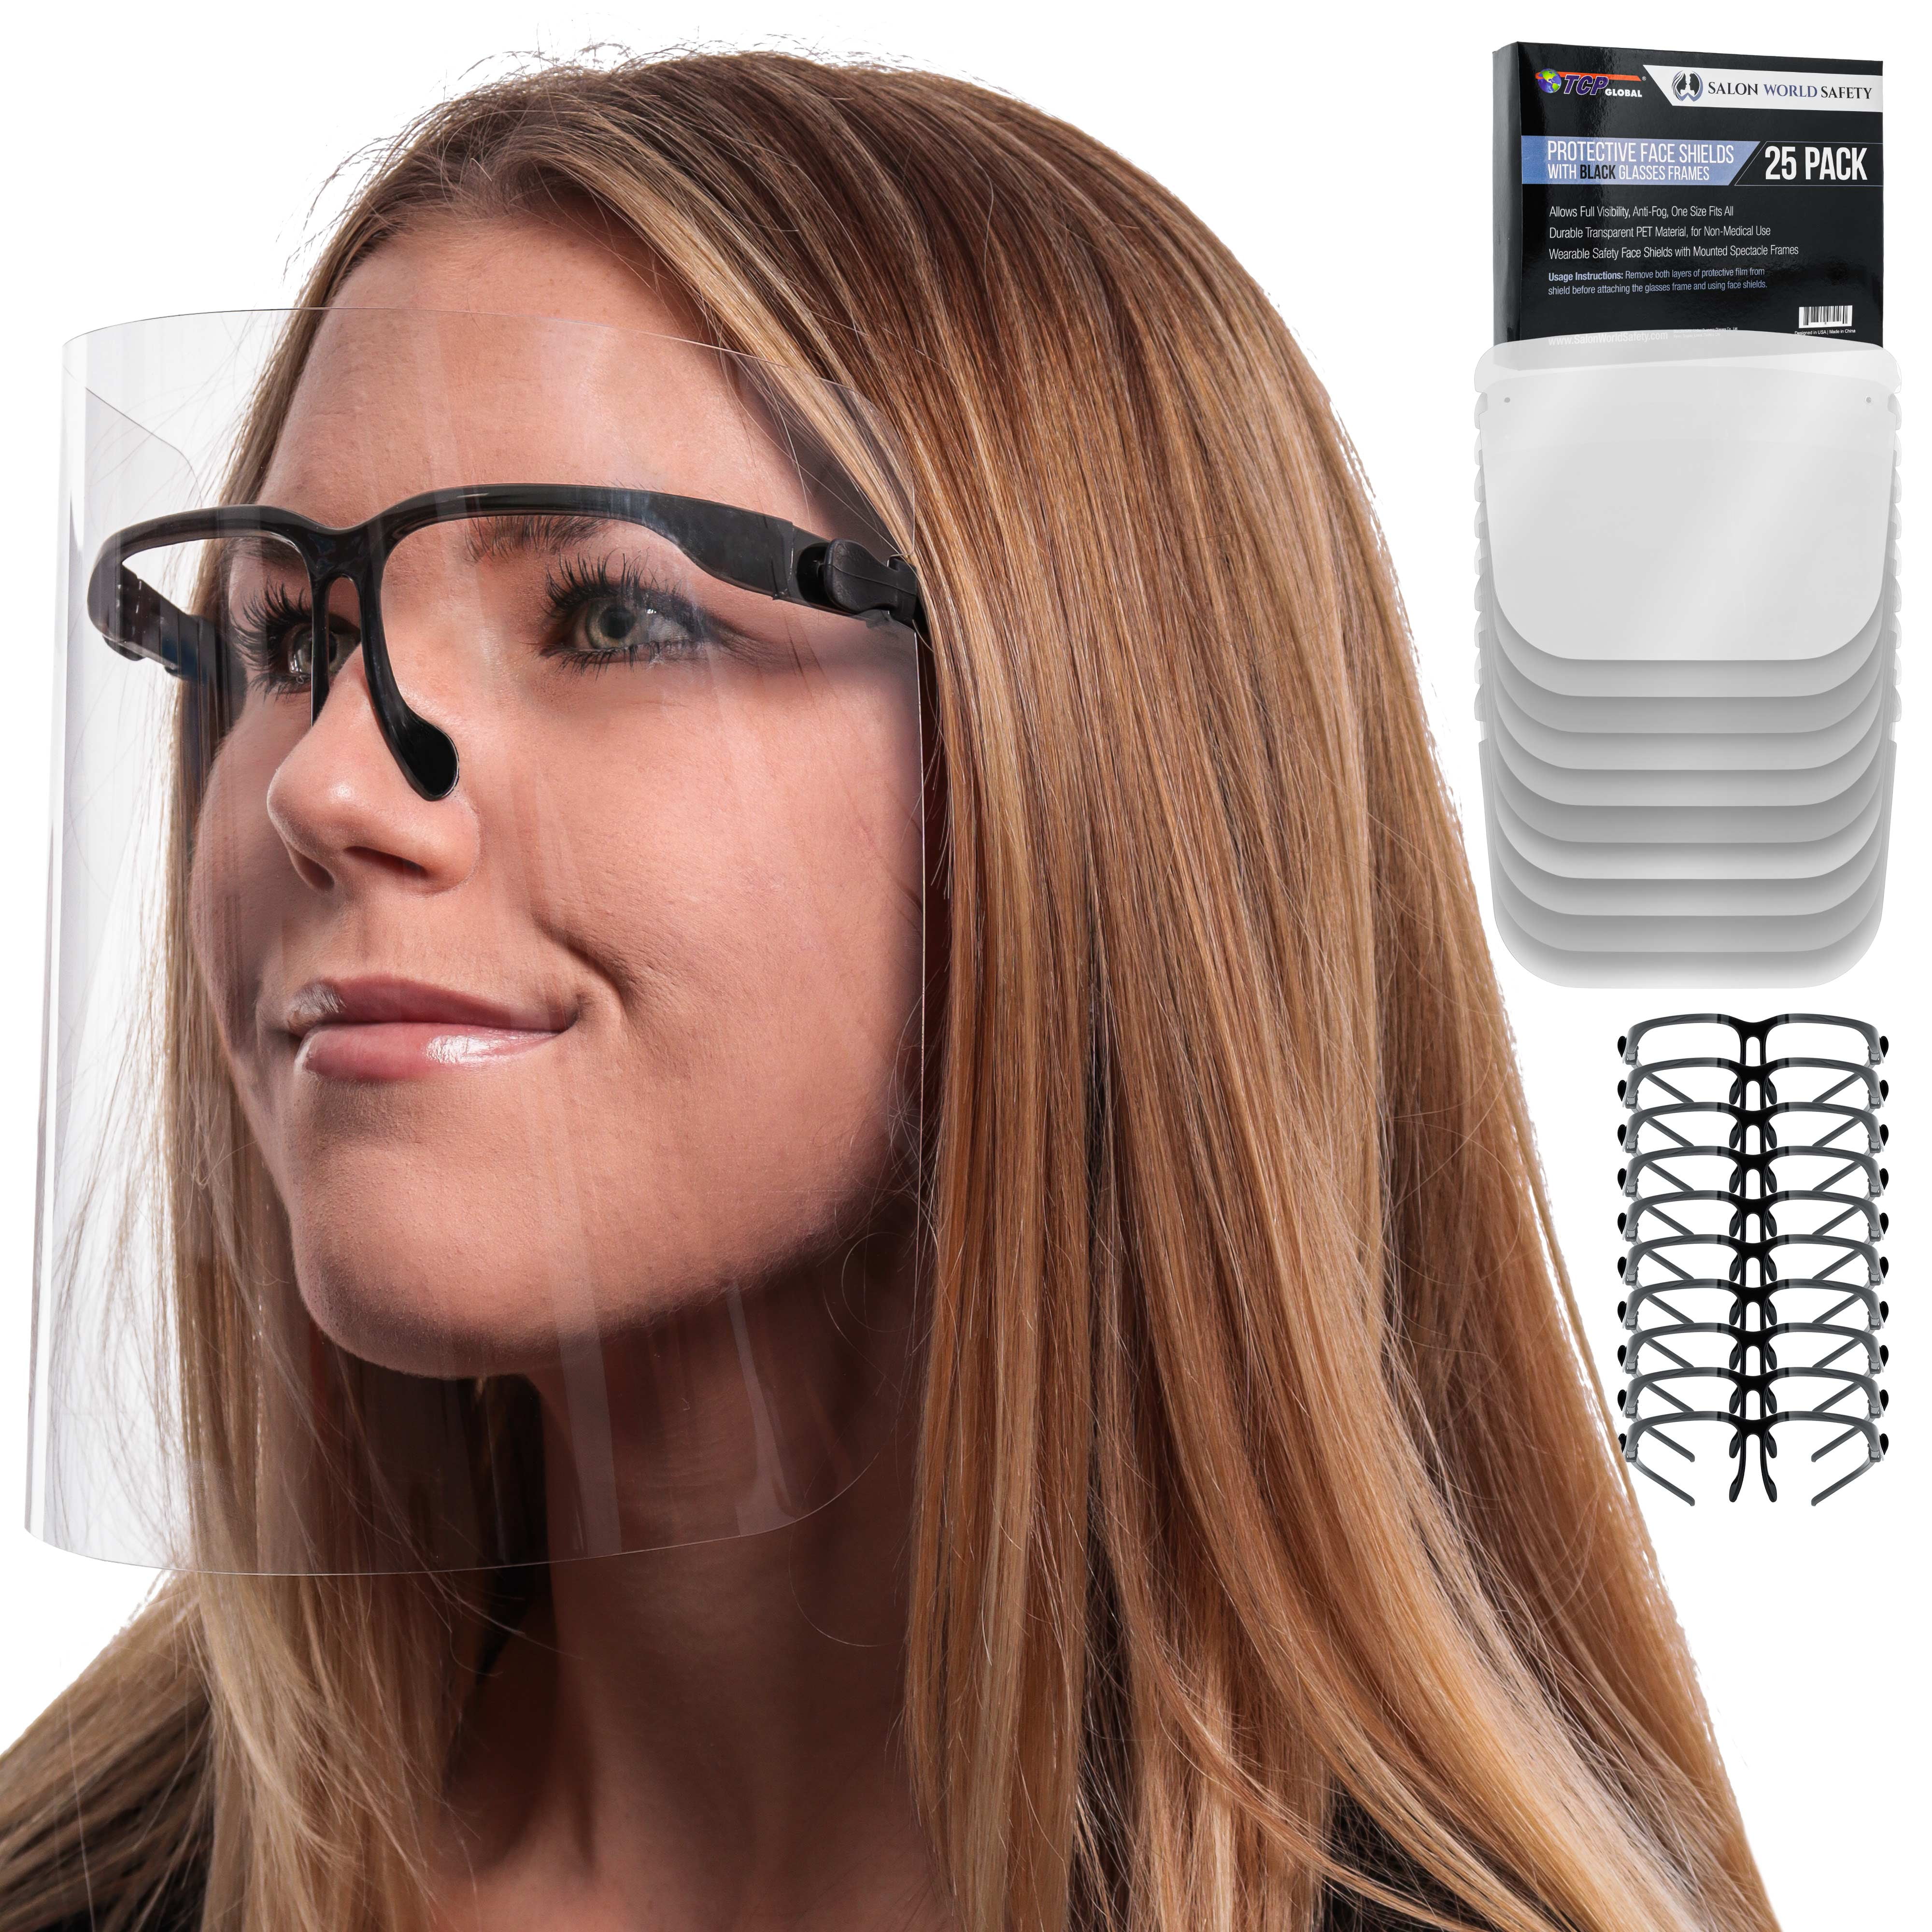 Details about   Face-Shield Protective Facial Cover Transparent Glasses Visor Anti-Fog Cover 